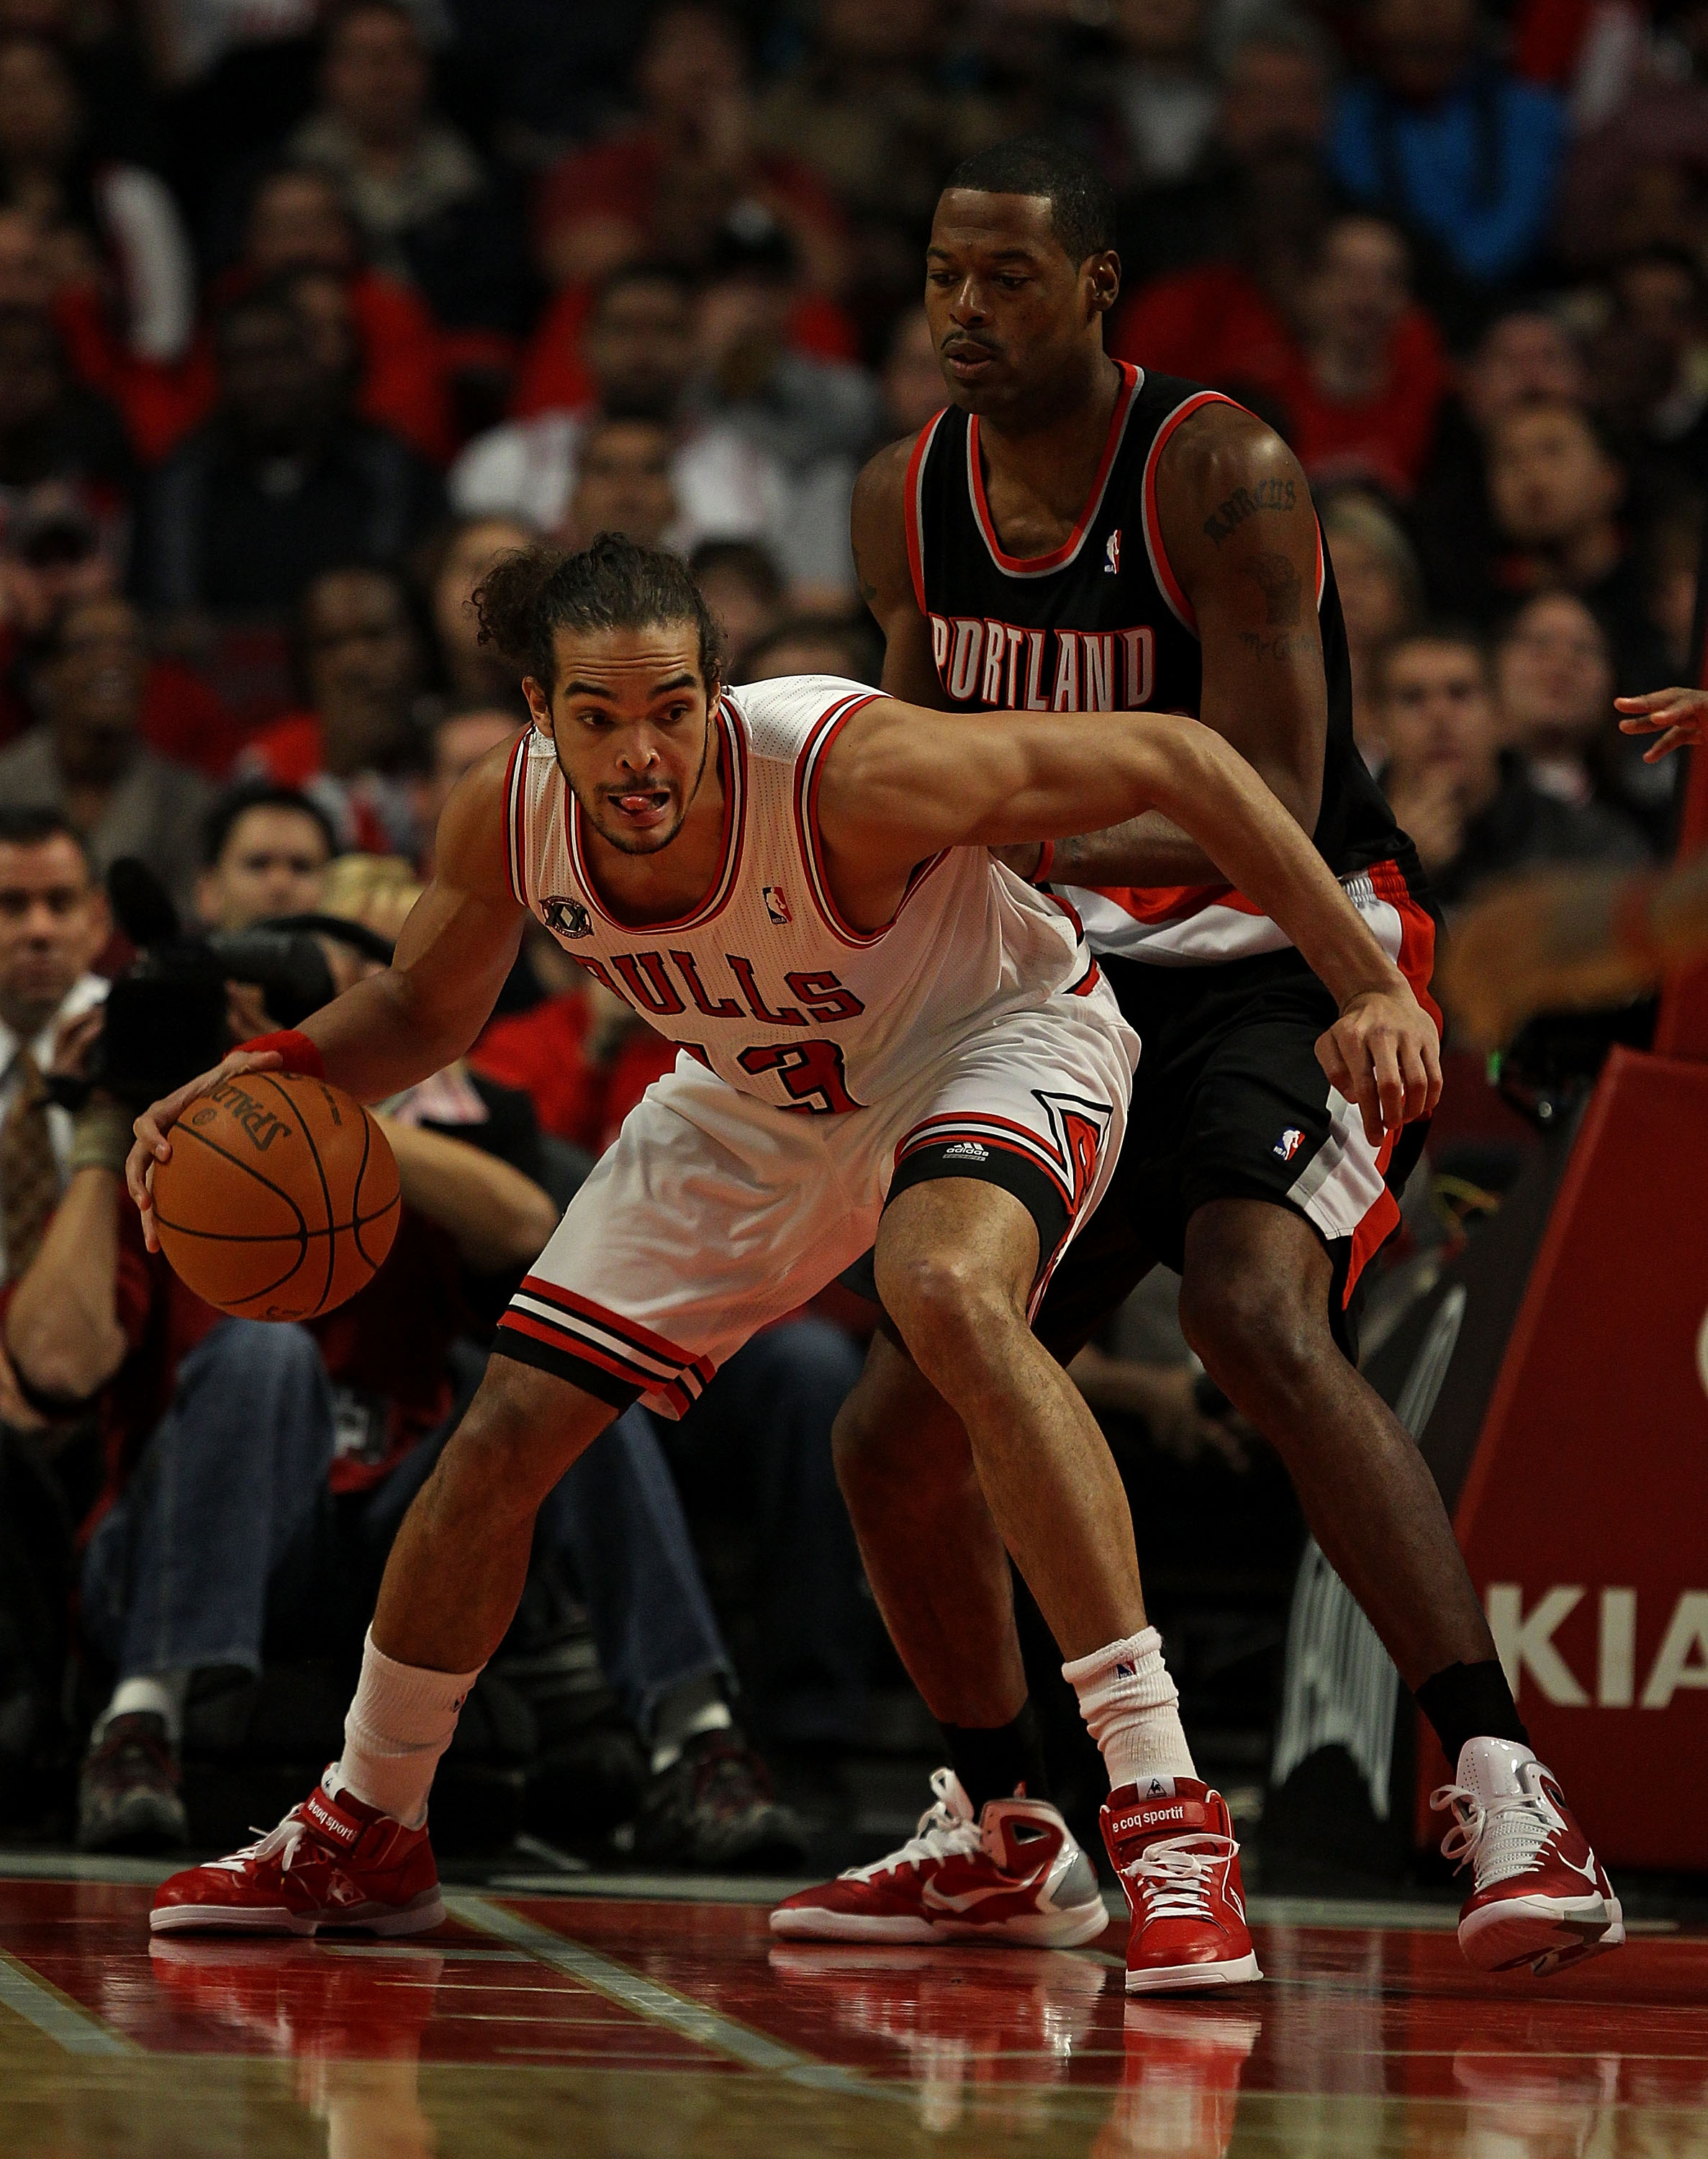 CHICAGO - NOVEMBER 01: Joakim Noah #13 of the Chicago Bulls moves against Marcus Camby #23 of the Portland Trail Blazers at the United Center on November 1, 2010 in Chicago, Illinois. The Bulls defeated the Trail Blazers 110-98. NOTE TO USER: User express